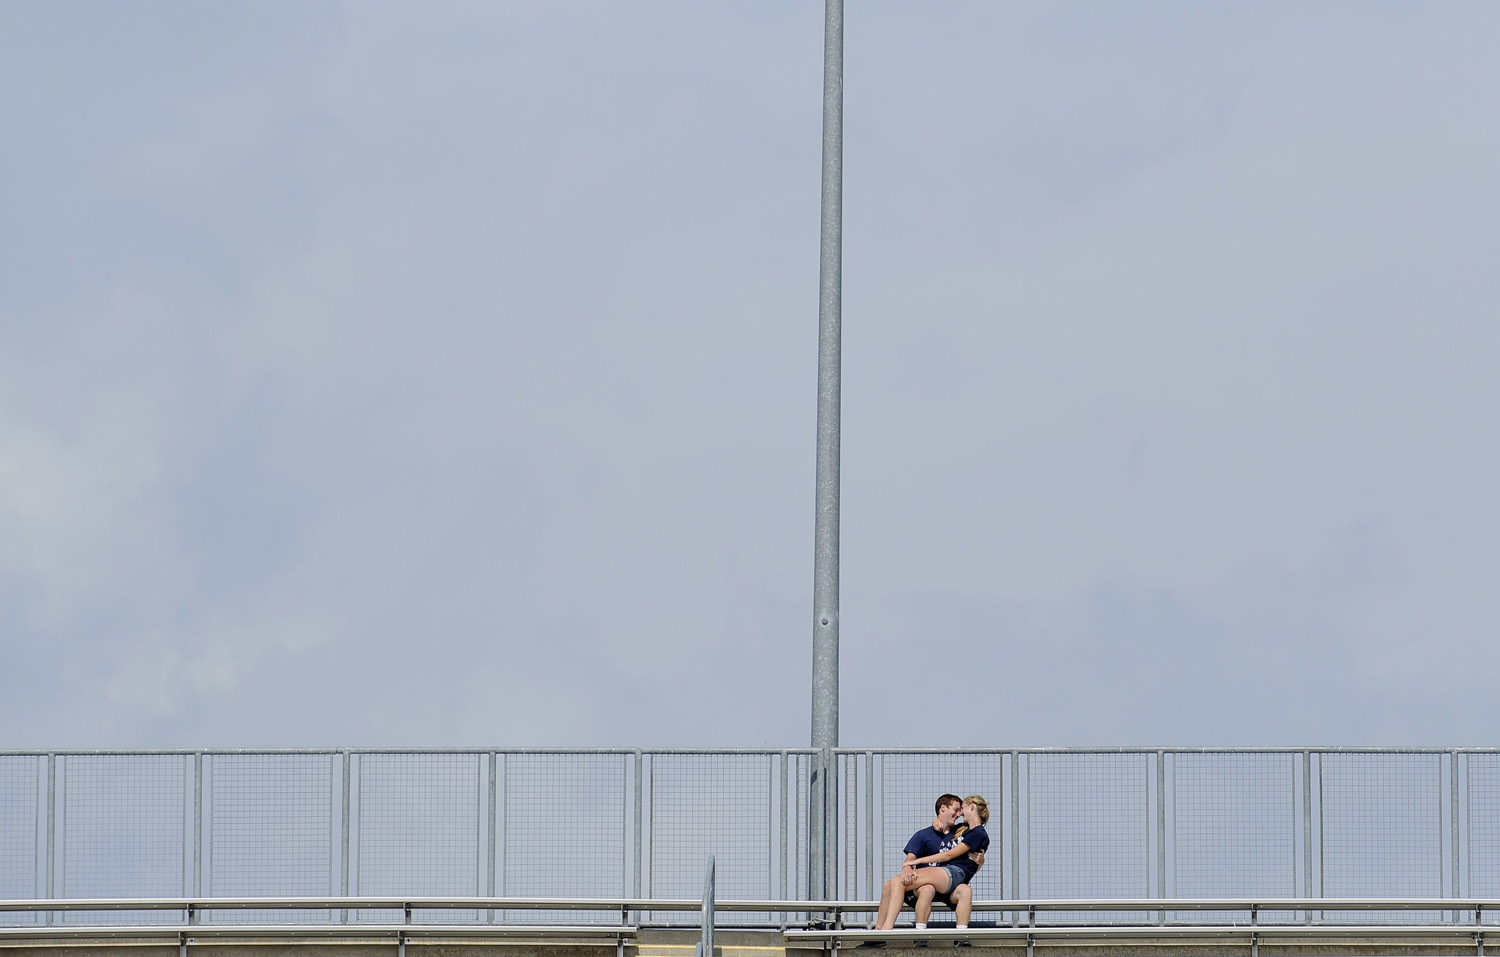 A couple hugs on the bleachers at Rentschler Field during the second half of an NCAA college football game between Connecticut and Stony Brook on Sept. 6, 2014, in East Hartford, Conn.